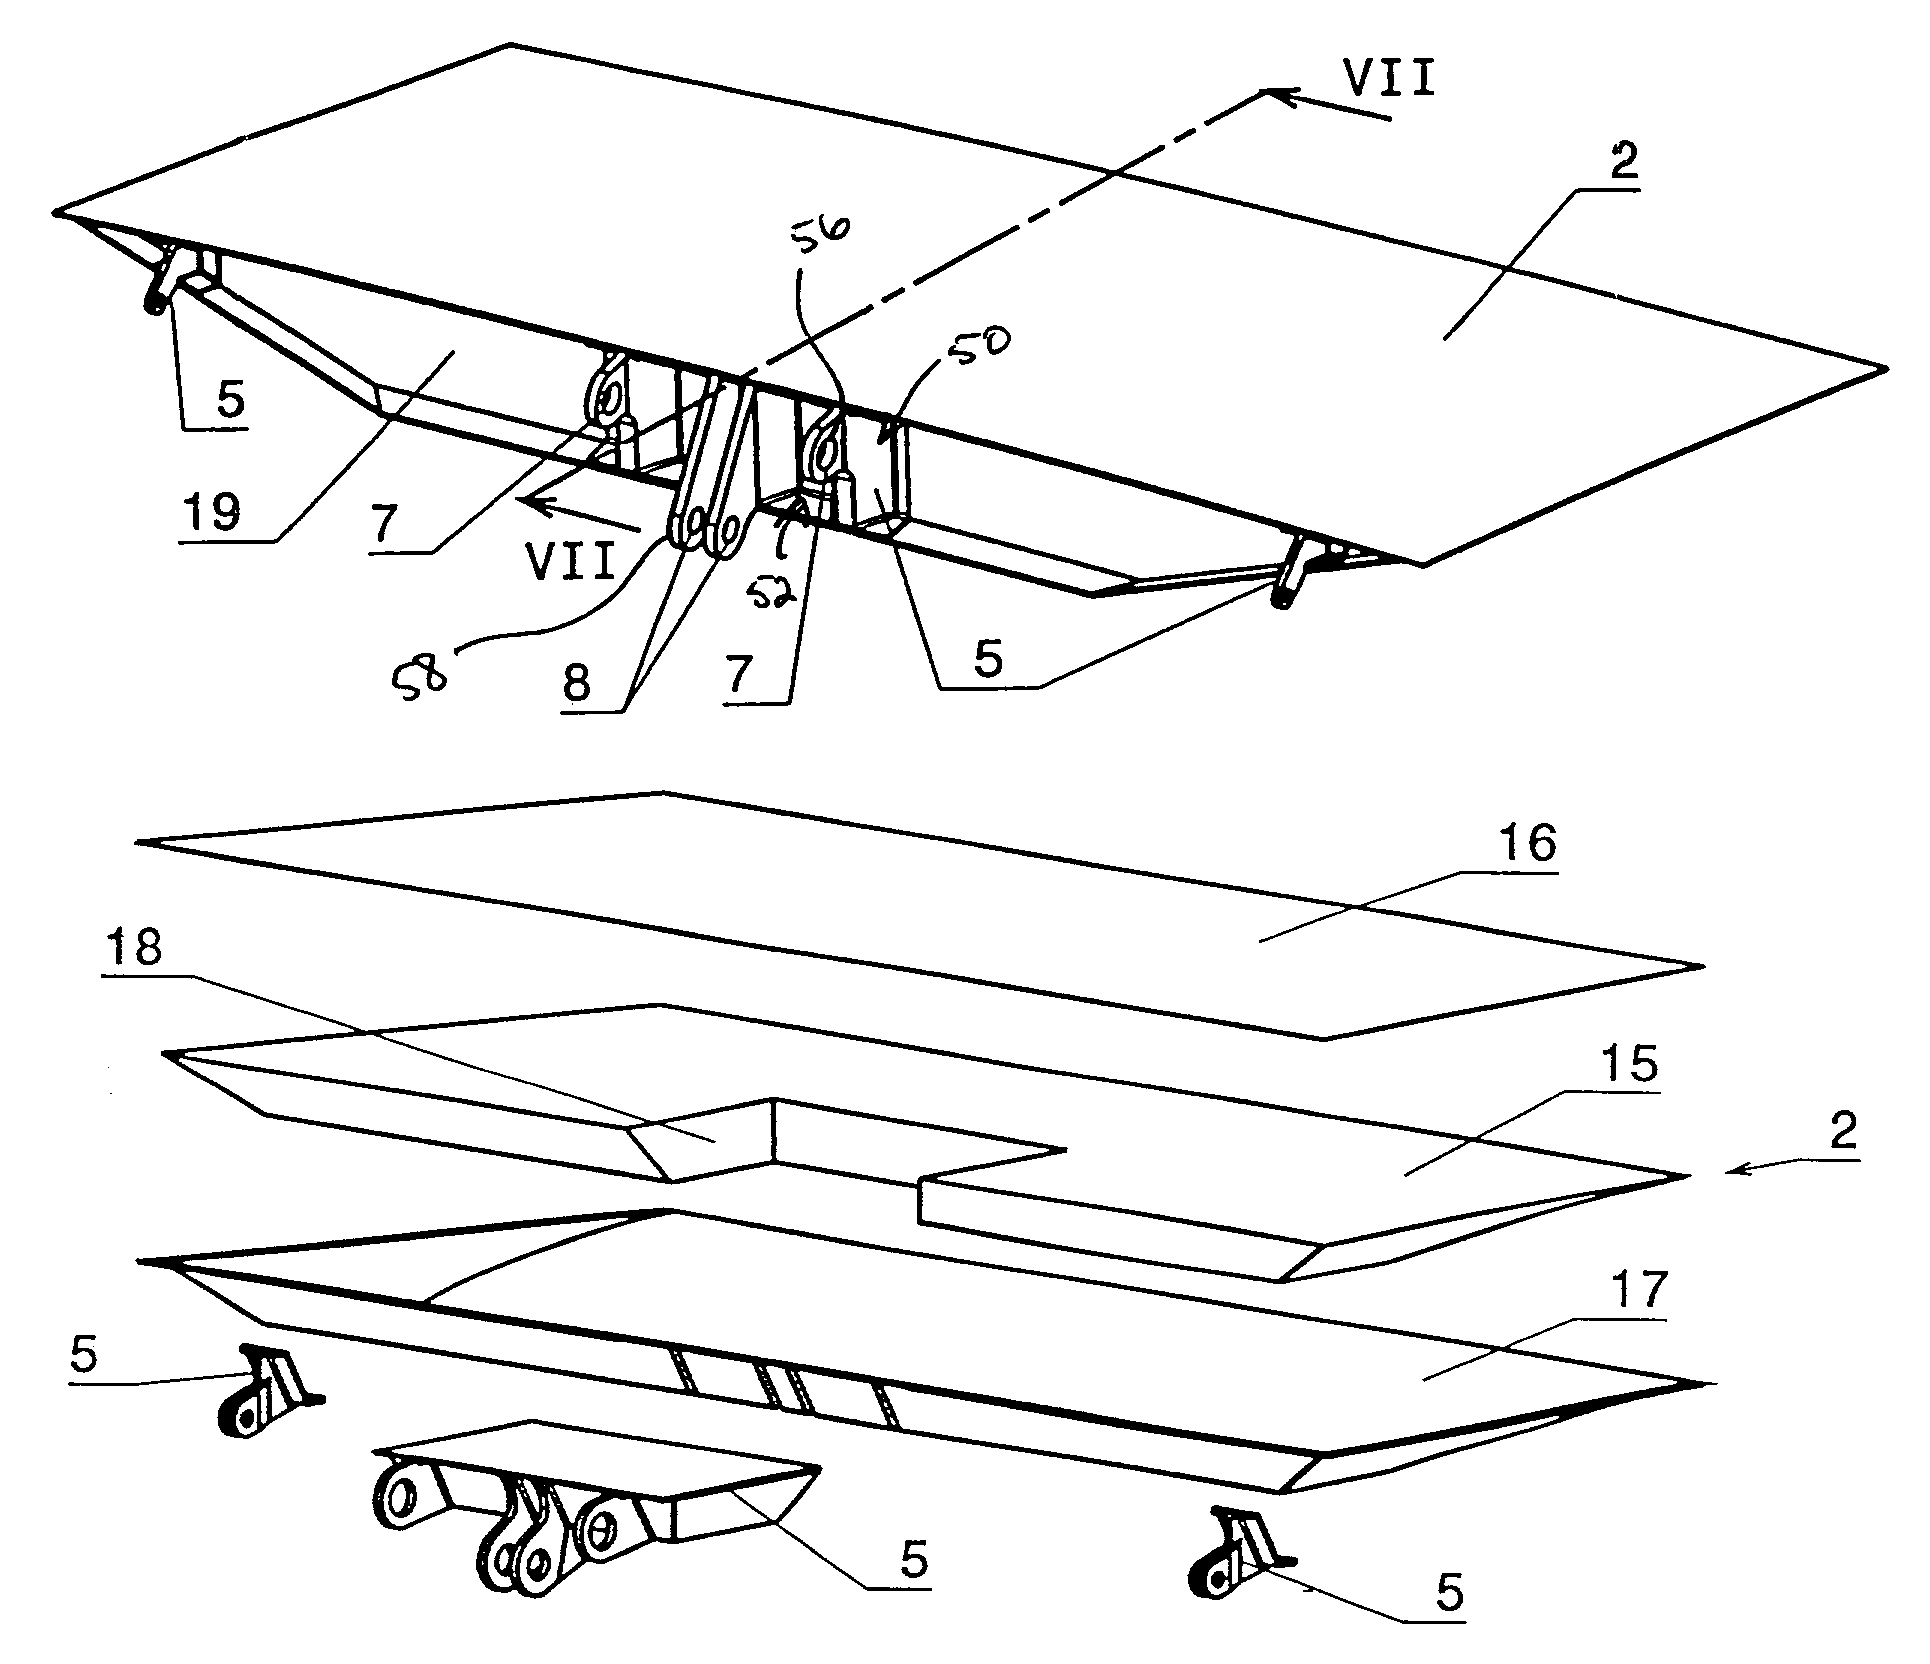 Device for connecting movable parts with structural elements of airplanes or the like